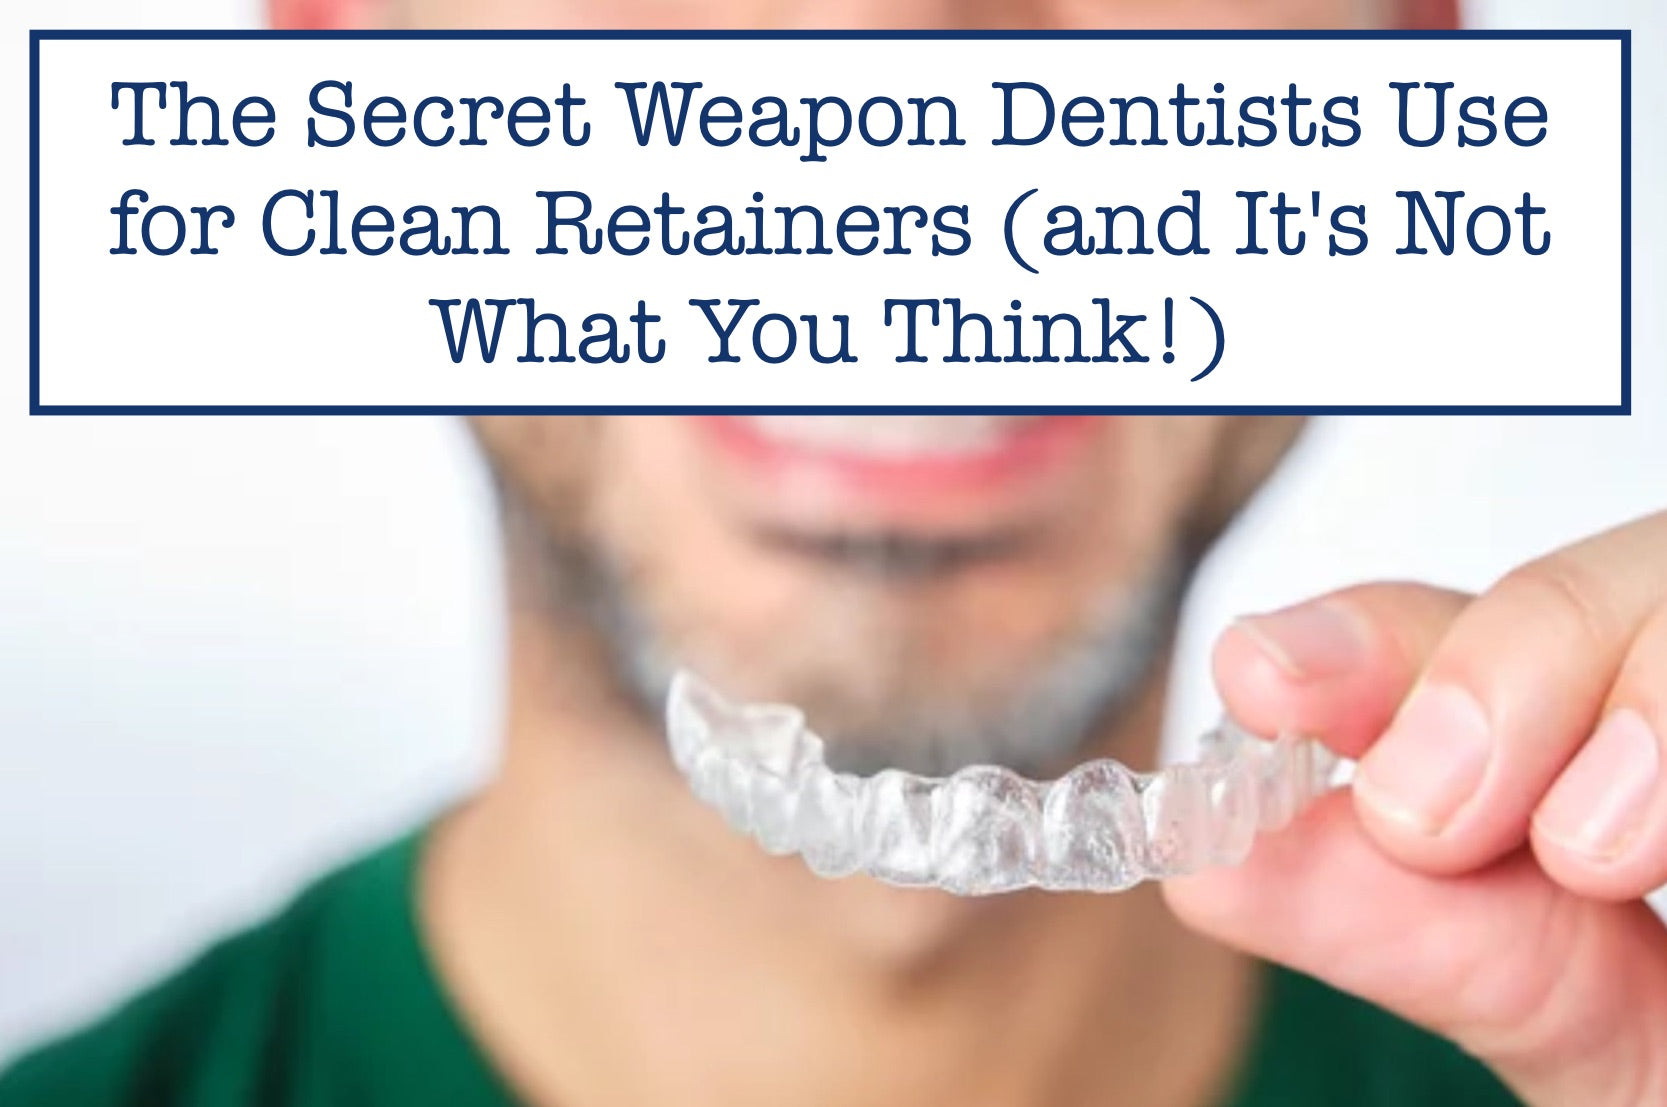 The Secret Weapon Dentists Use for Clean Retainers (and It's Not What You Think!)